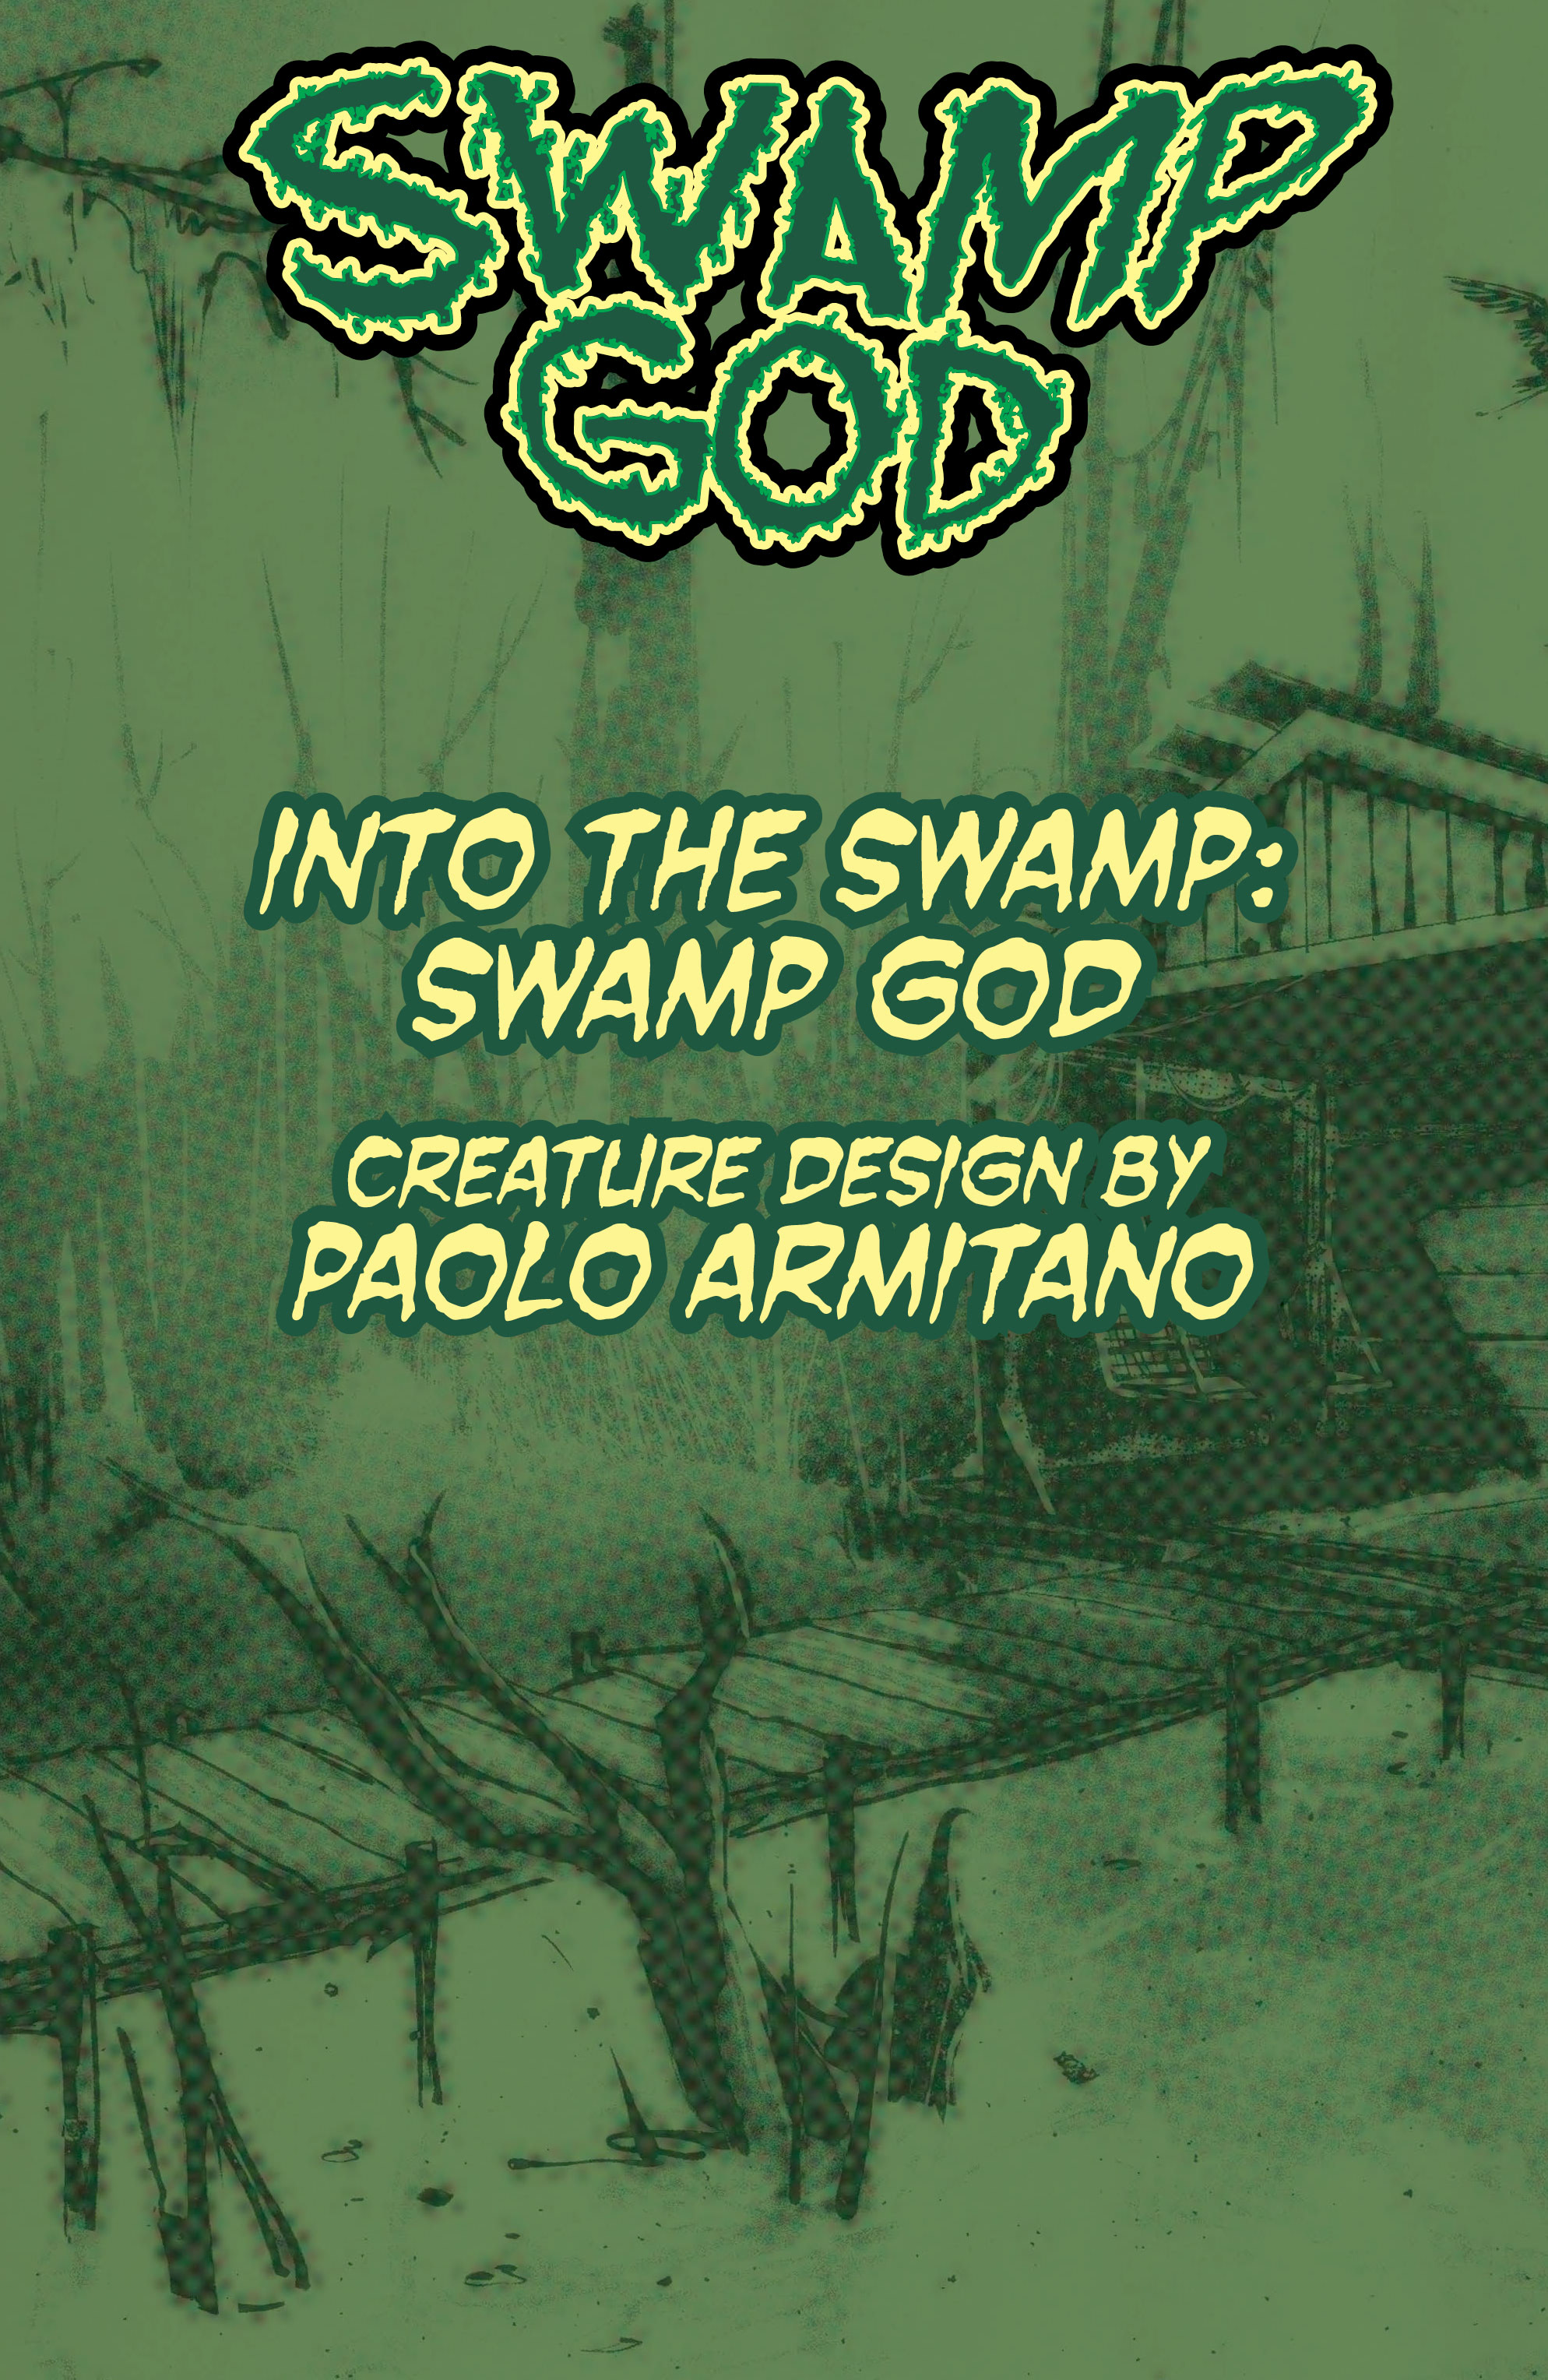 Read online Swamp God comic -  Issue #4 - 23